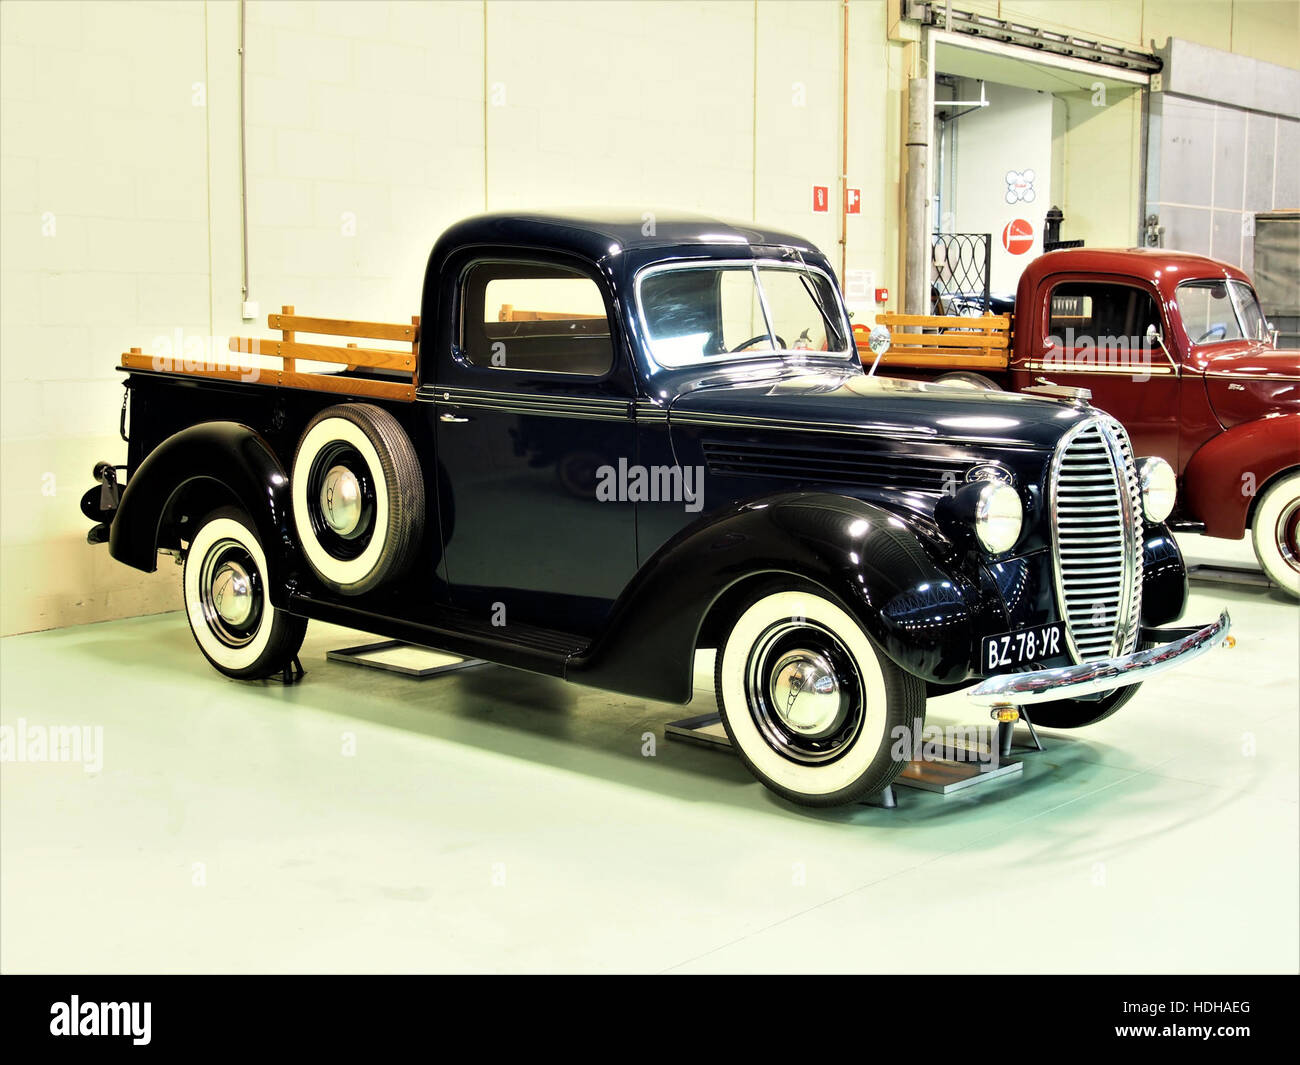 1938 Ford 830 Pickup, 3622cc, 8 cylinder V, 80hp pic2 Stock Photo